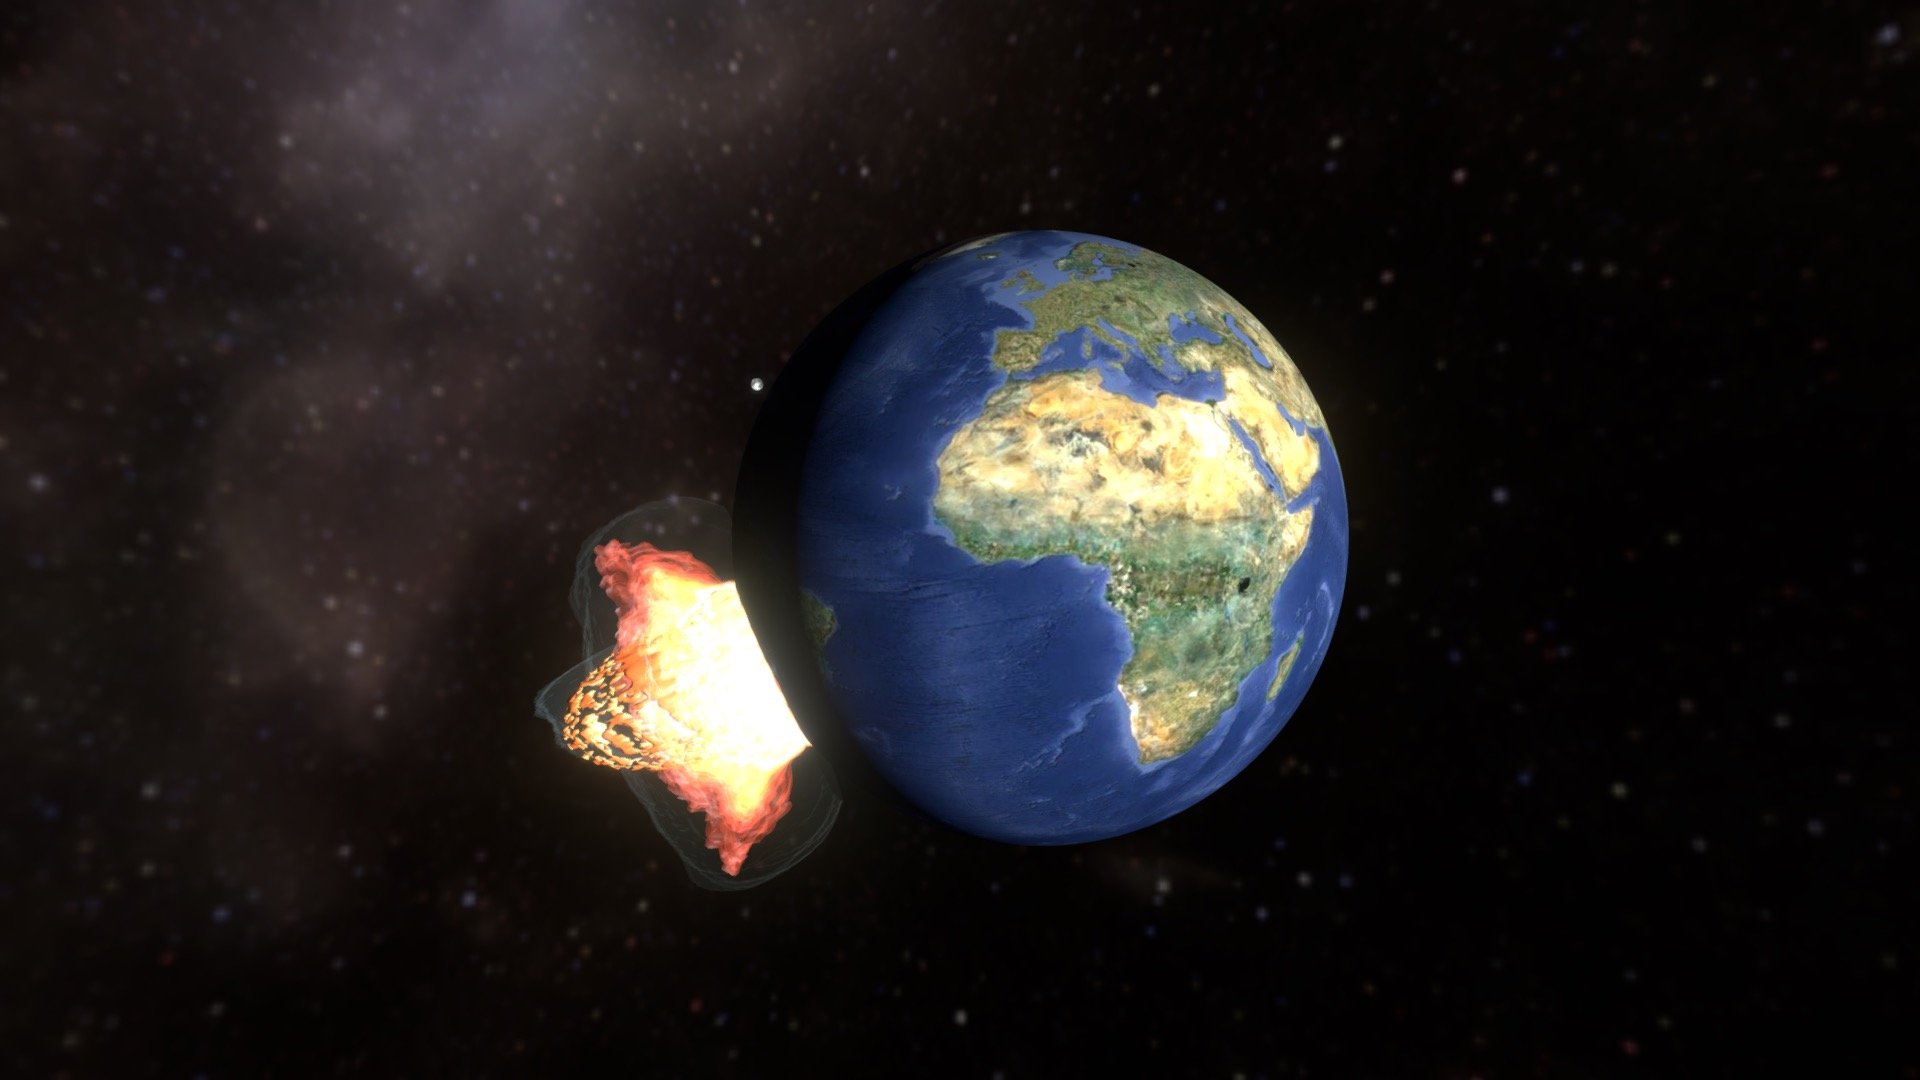 Giant asteroid collision with Earth